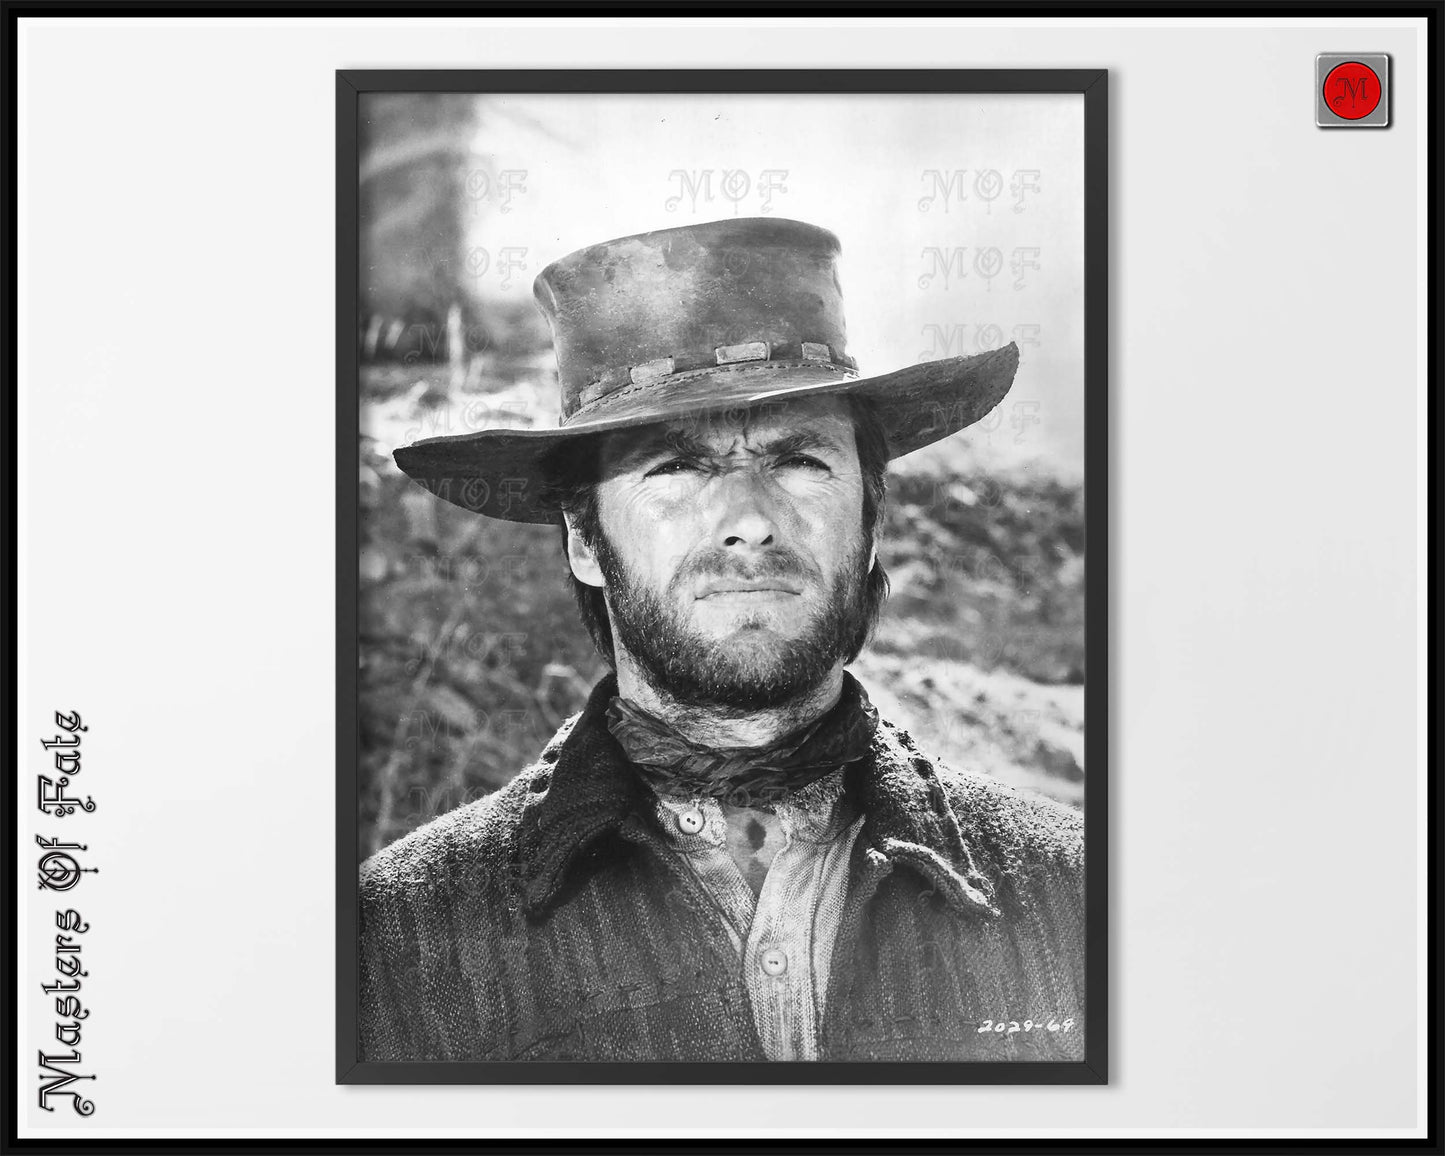 Clint Eastwood in Hat Poster Cowboy Western Print REMASTERED